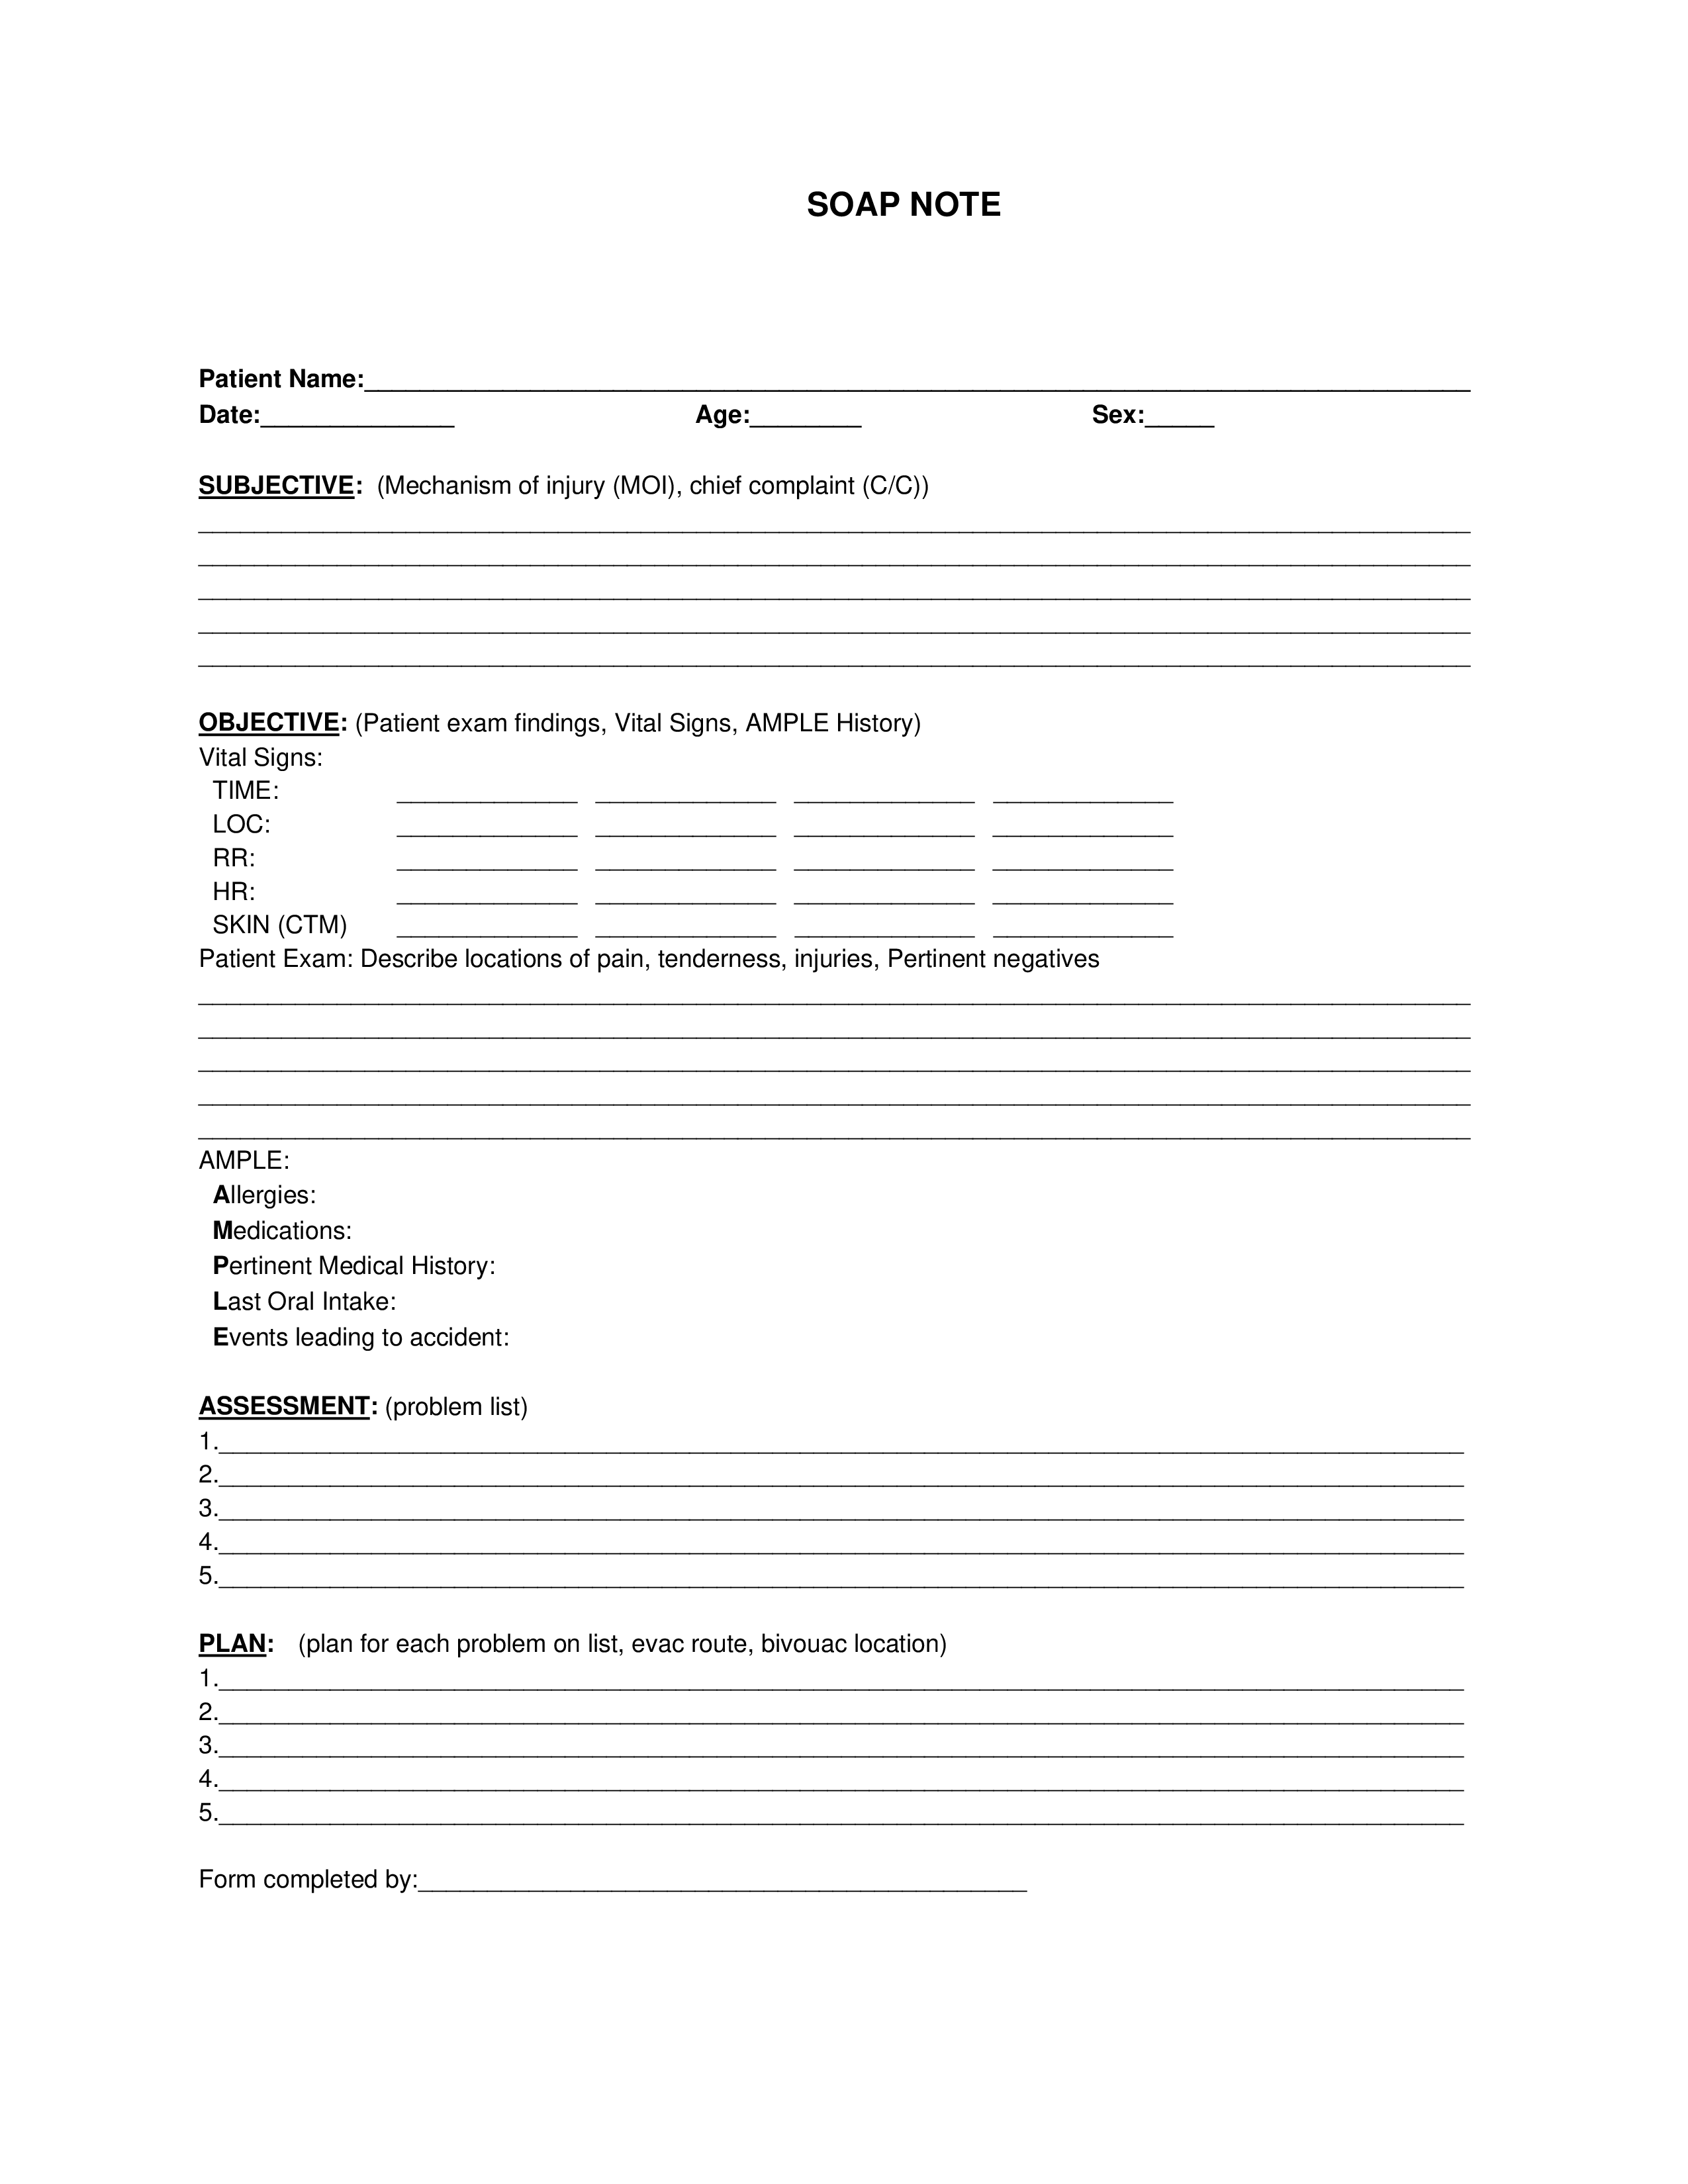 Blank Soap Note  Templates At Allbusinesstemplates